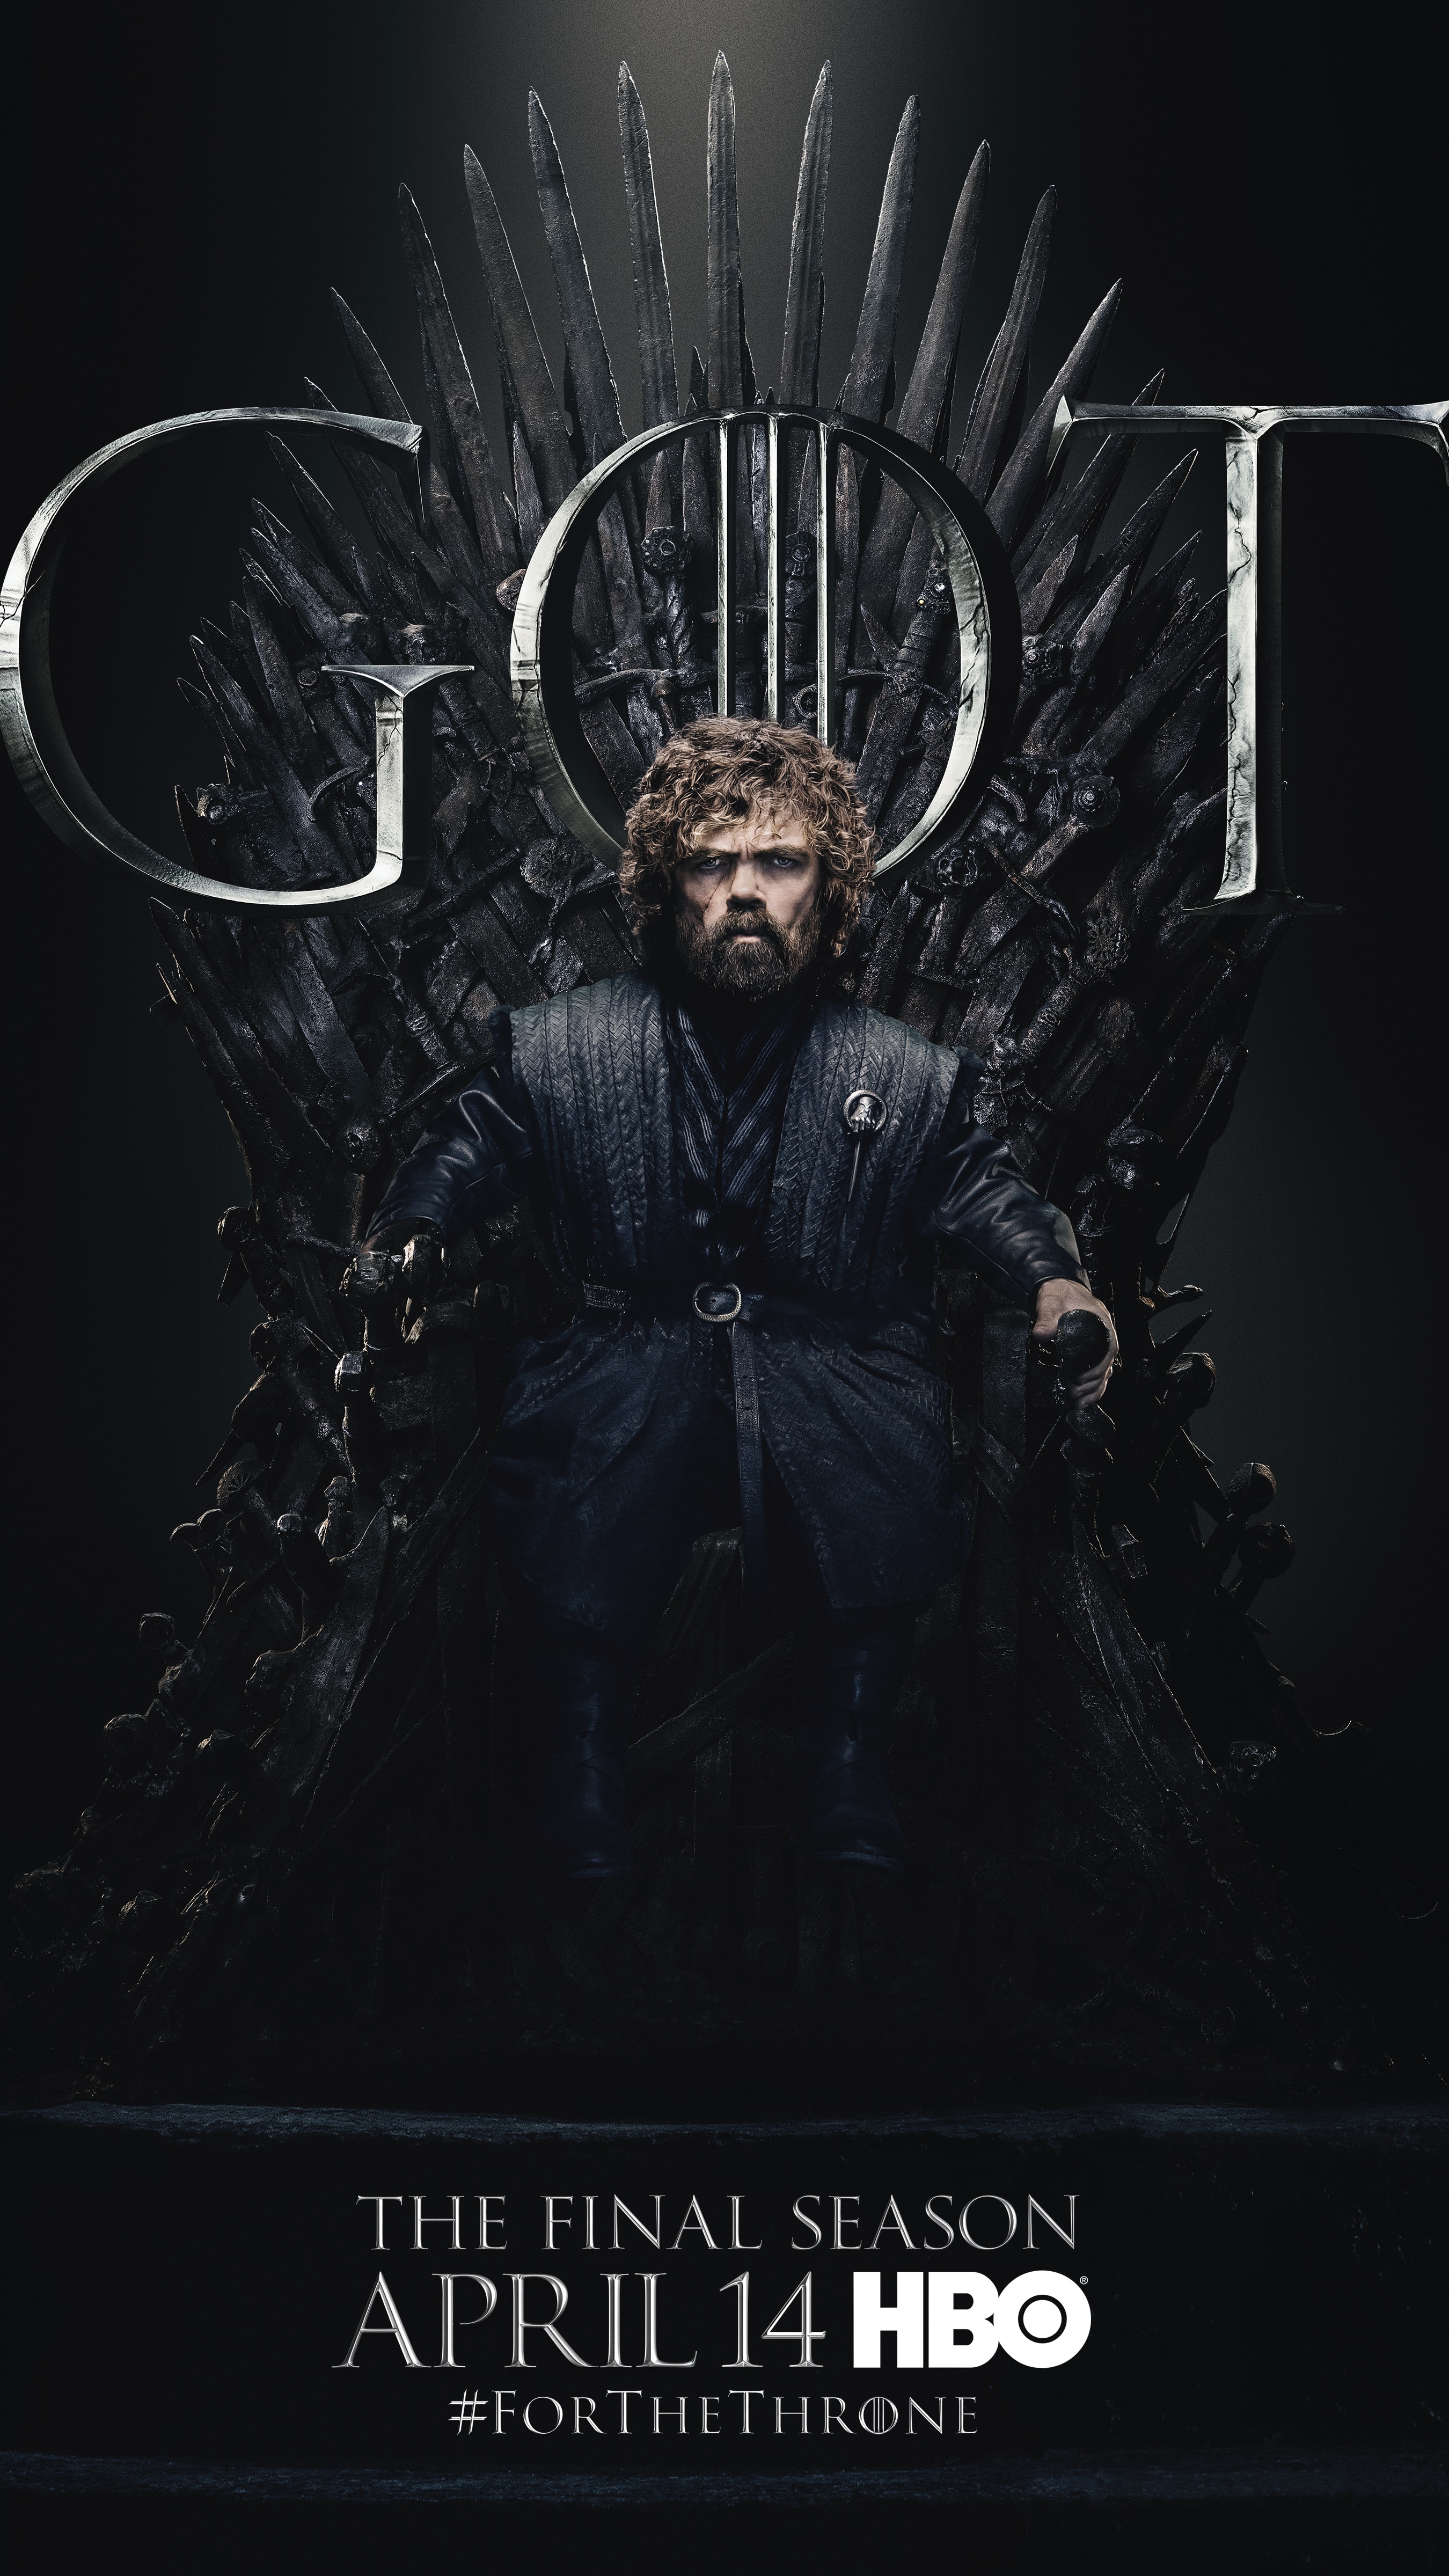 https://rozup.ir/up/justbarca/GOTS08/5.-Tyrion-Lannister-GOT-Season-8-For-The-Throne-Character-Poster-min.jpg